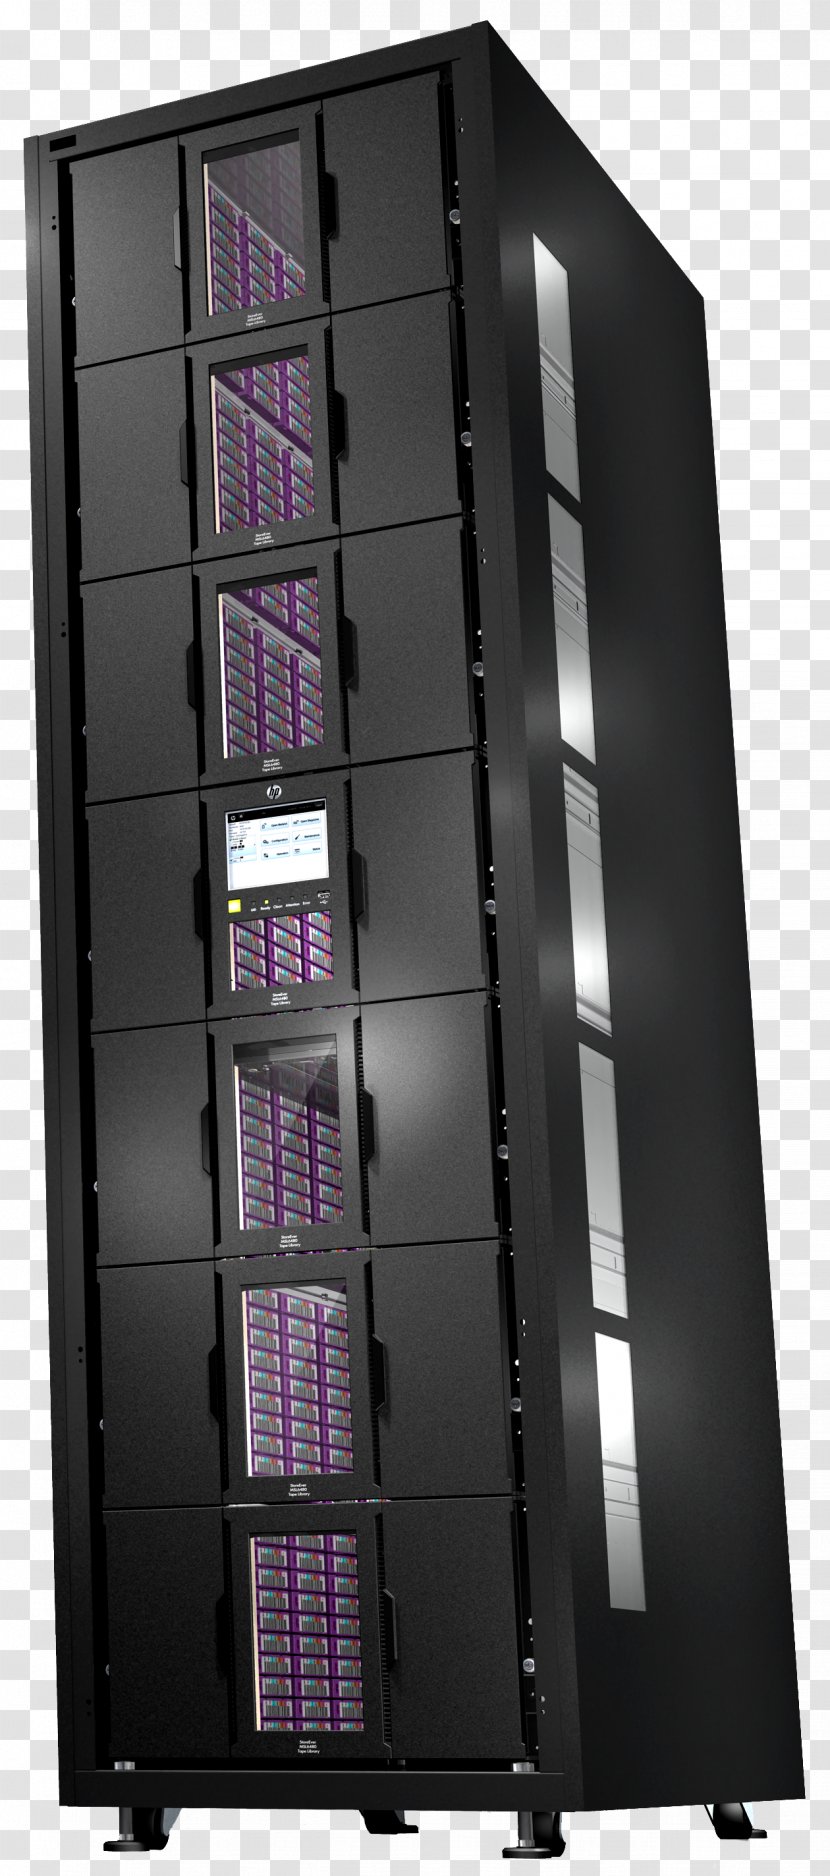 Computer Cases & Housings Disk Array Servers Cluster - Tape Drive Transparent PNG